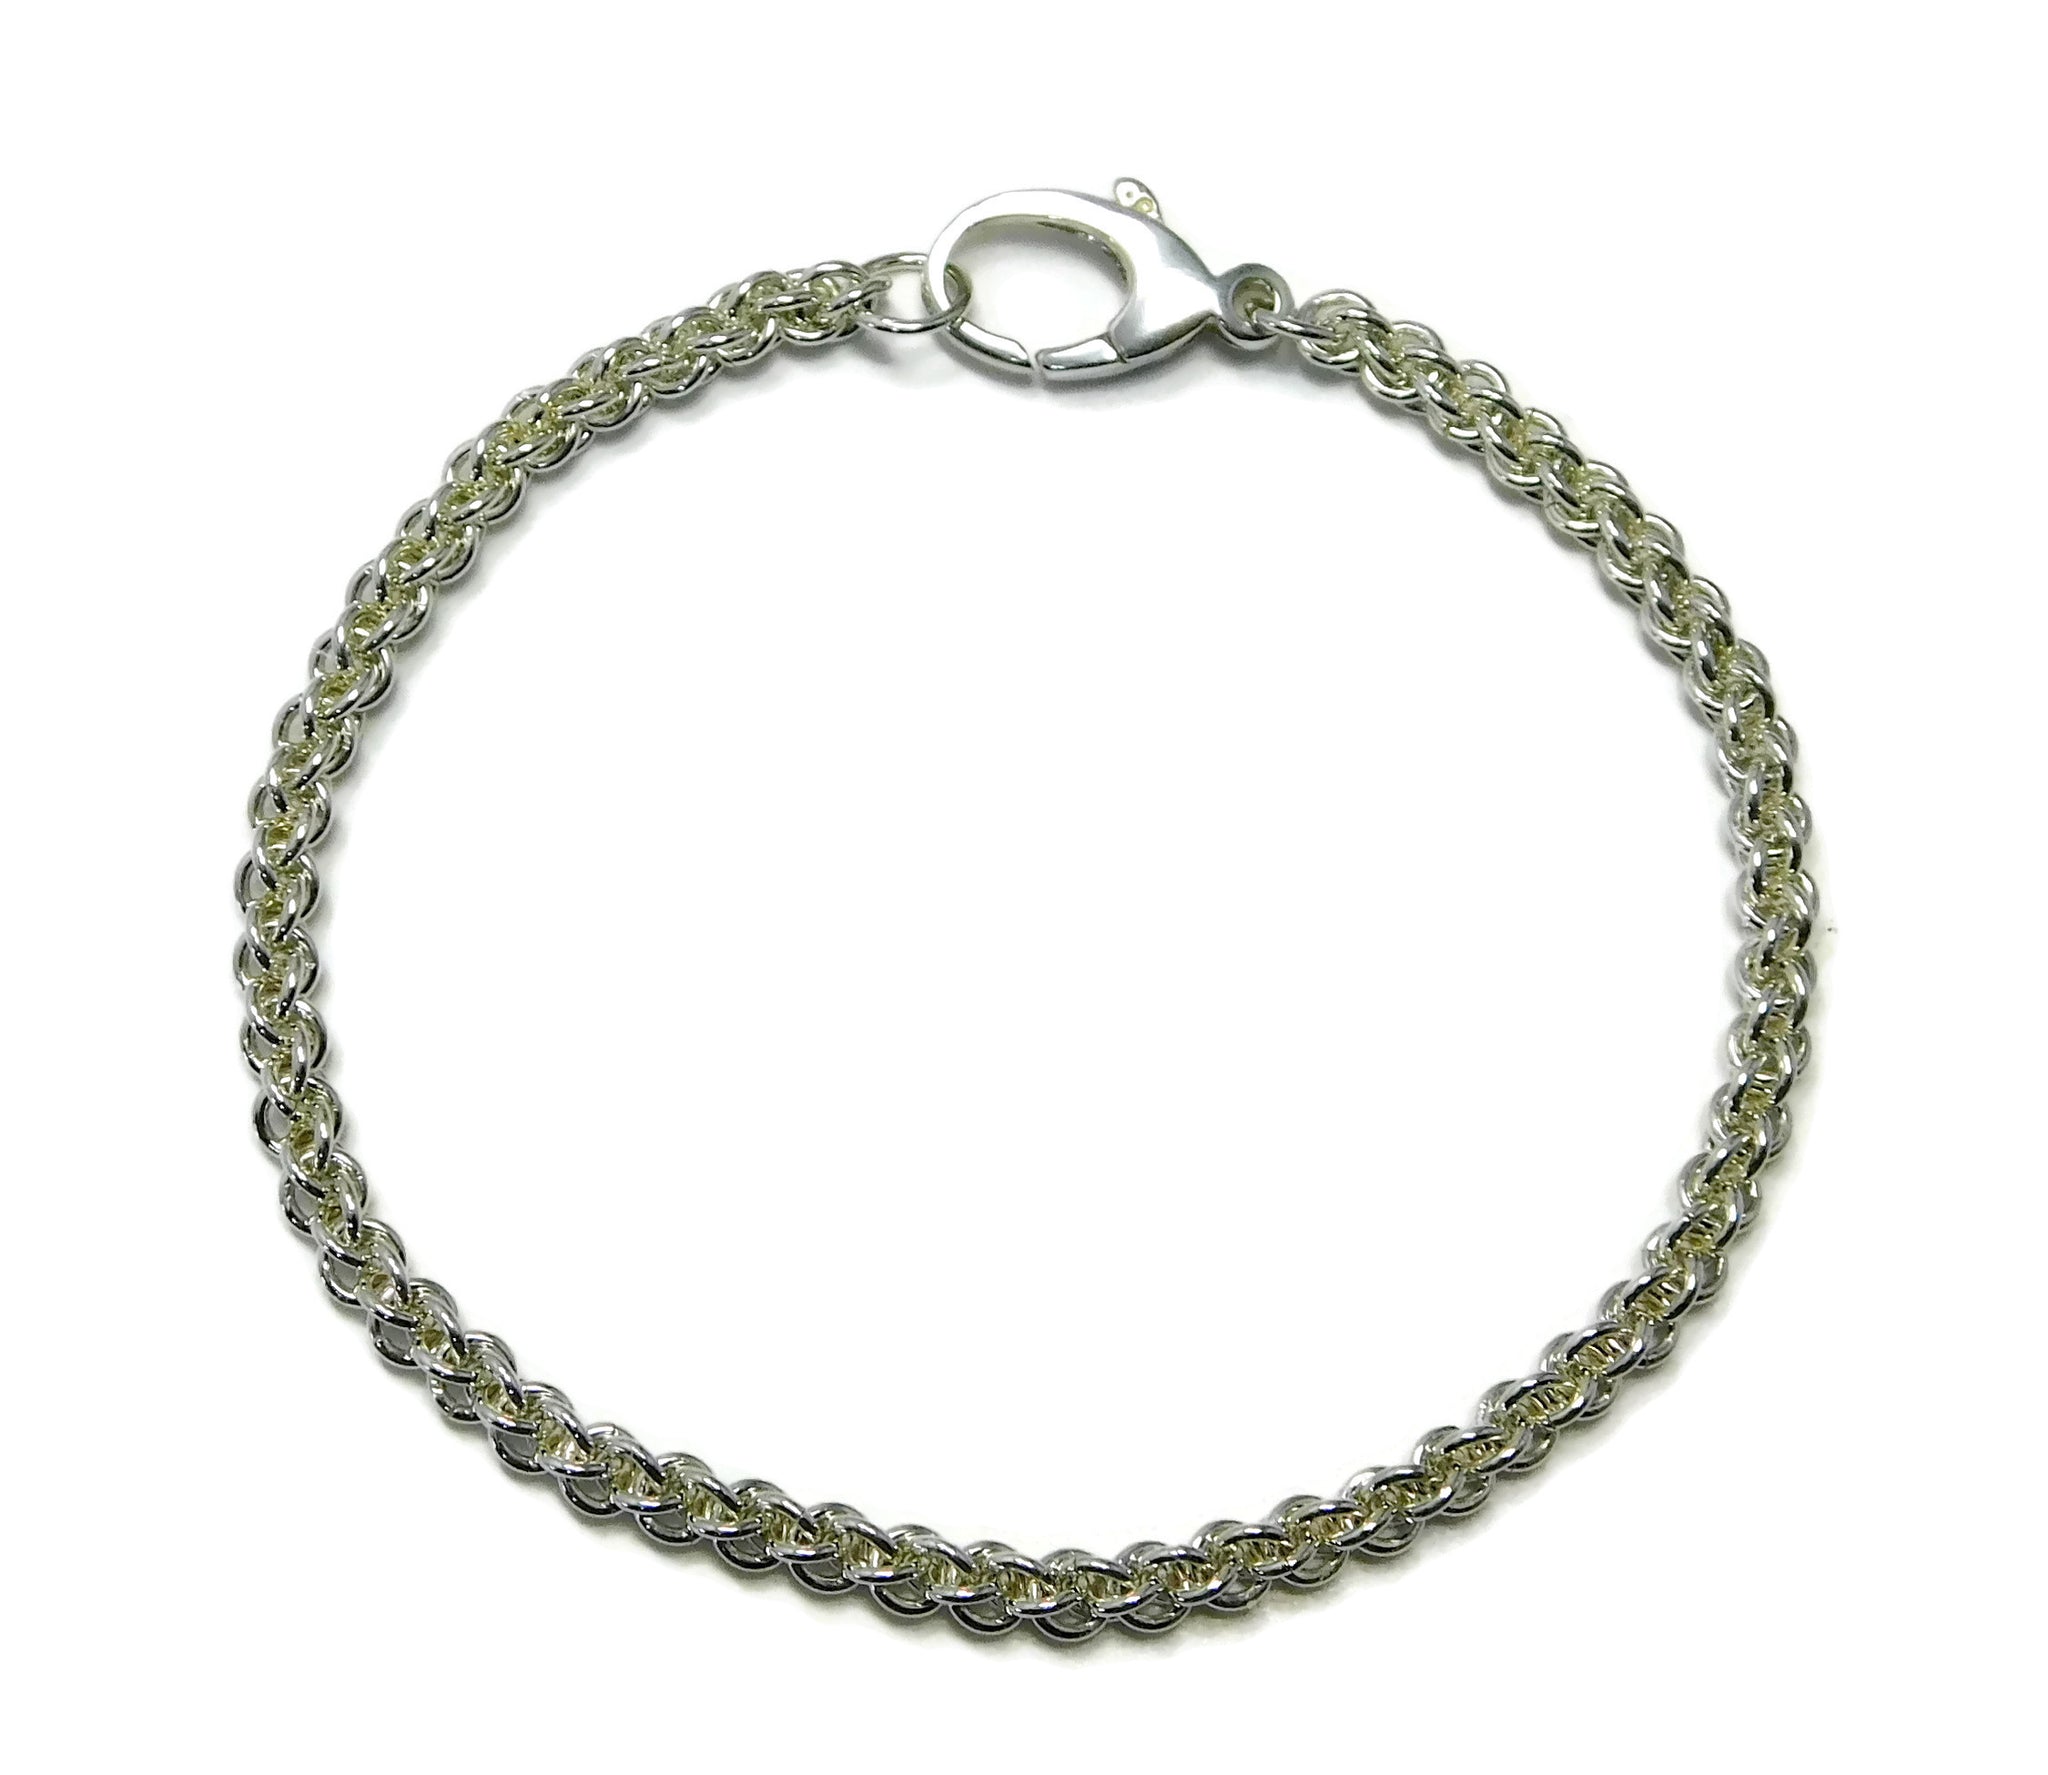 Sterling Rope Bracelet 12g Handmade Jens Pind Sterling Silver Chainmaille -  Etsy | Chain maille jewelry, Chain link bracelet, Chainmaille bracelet